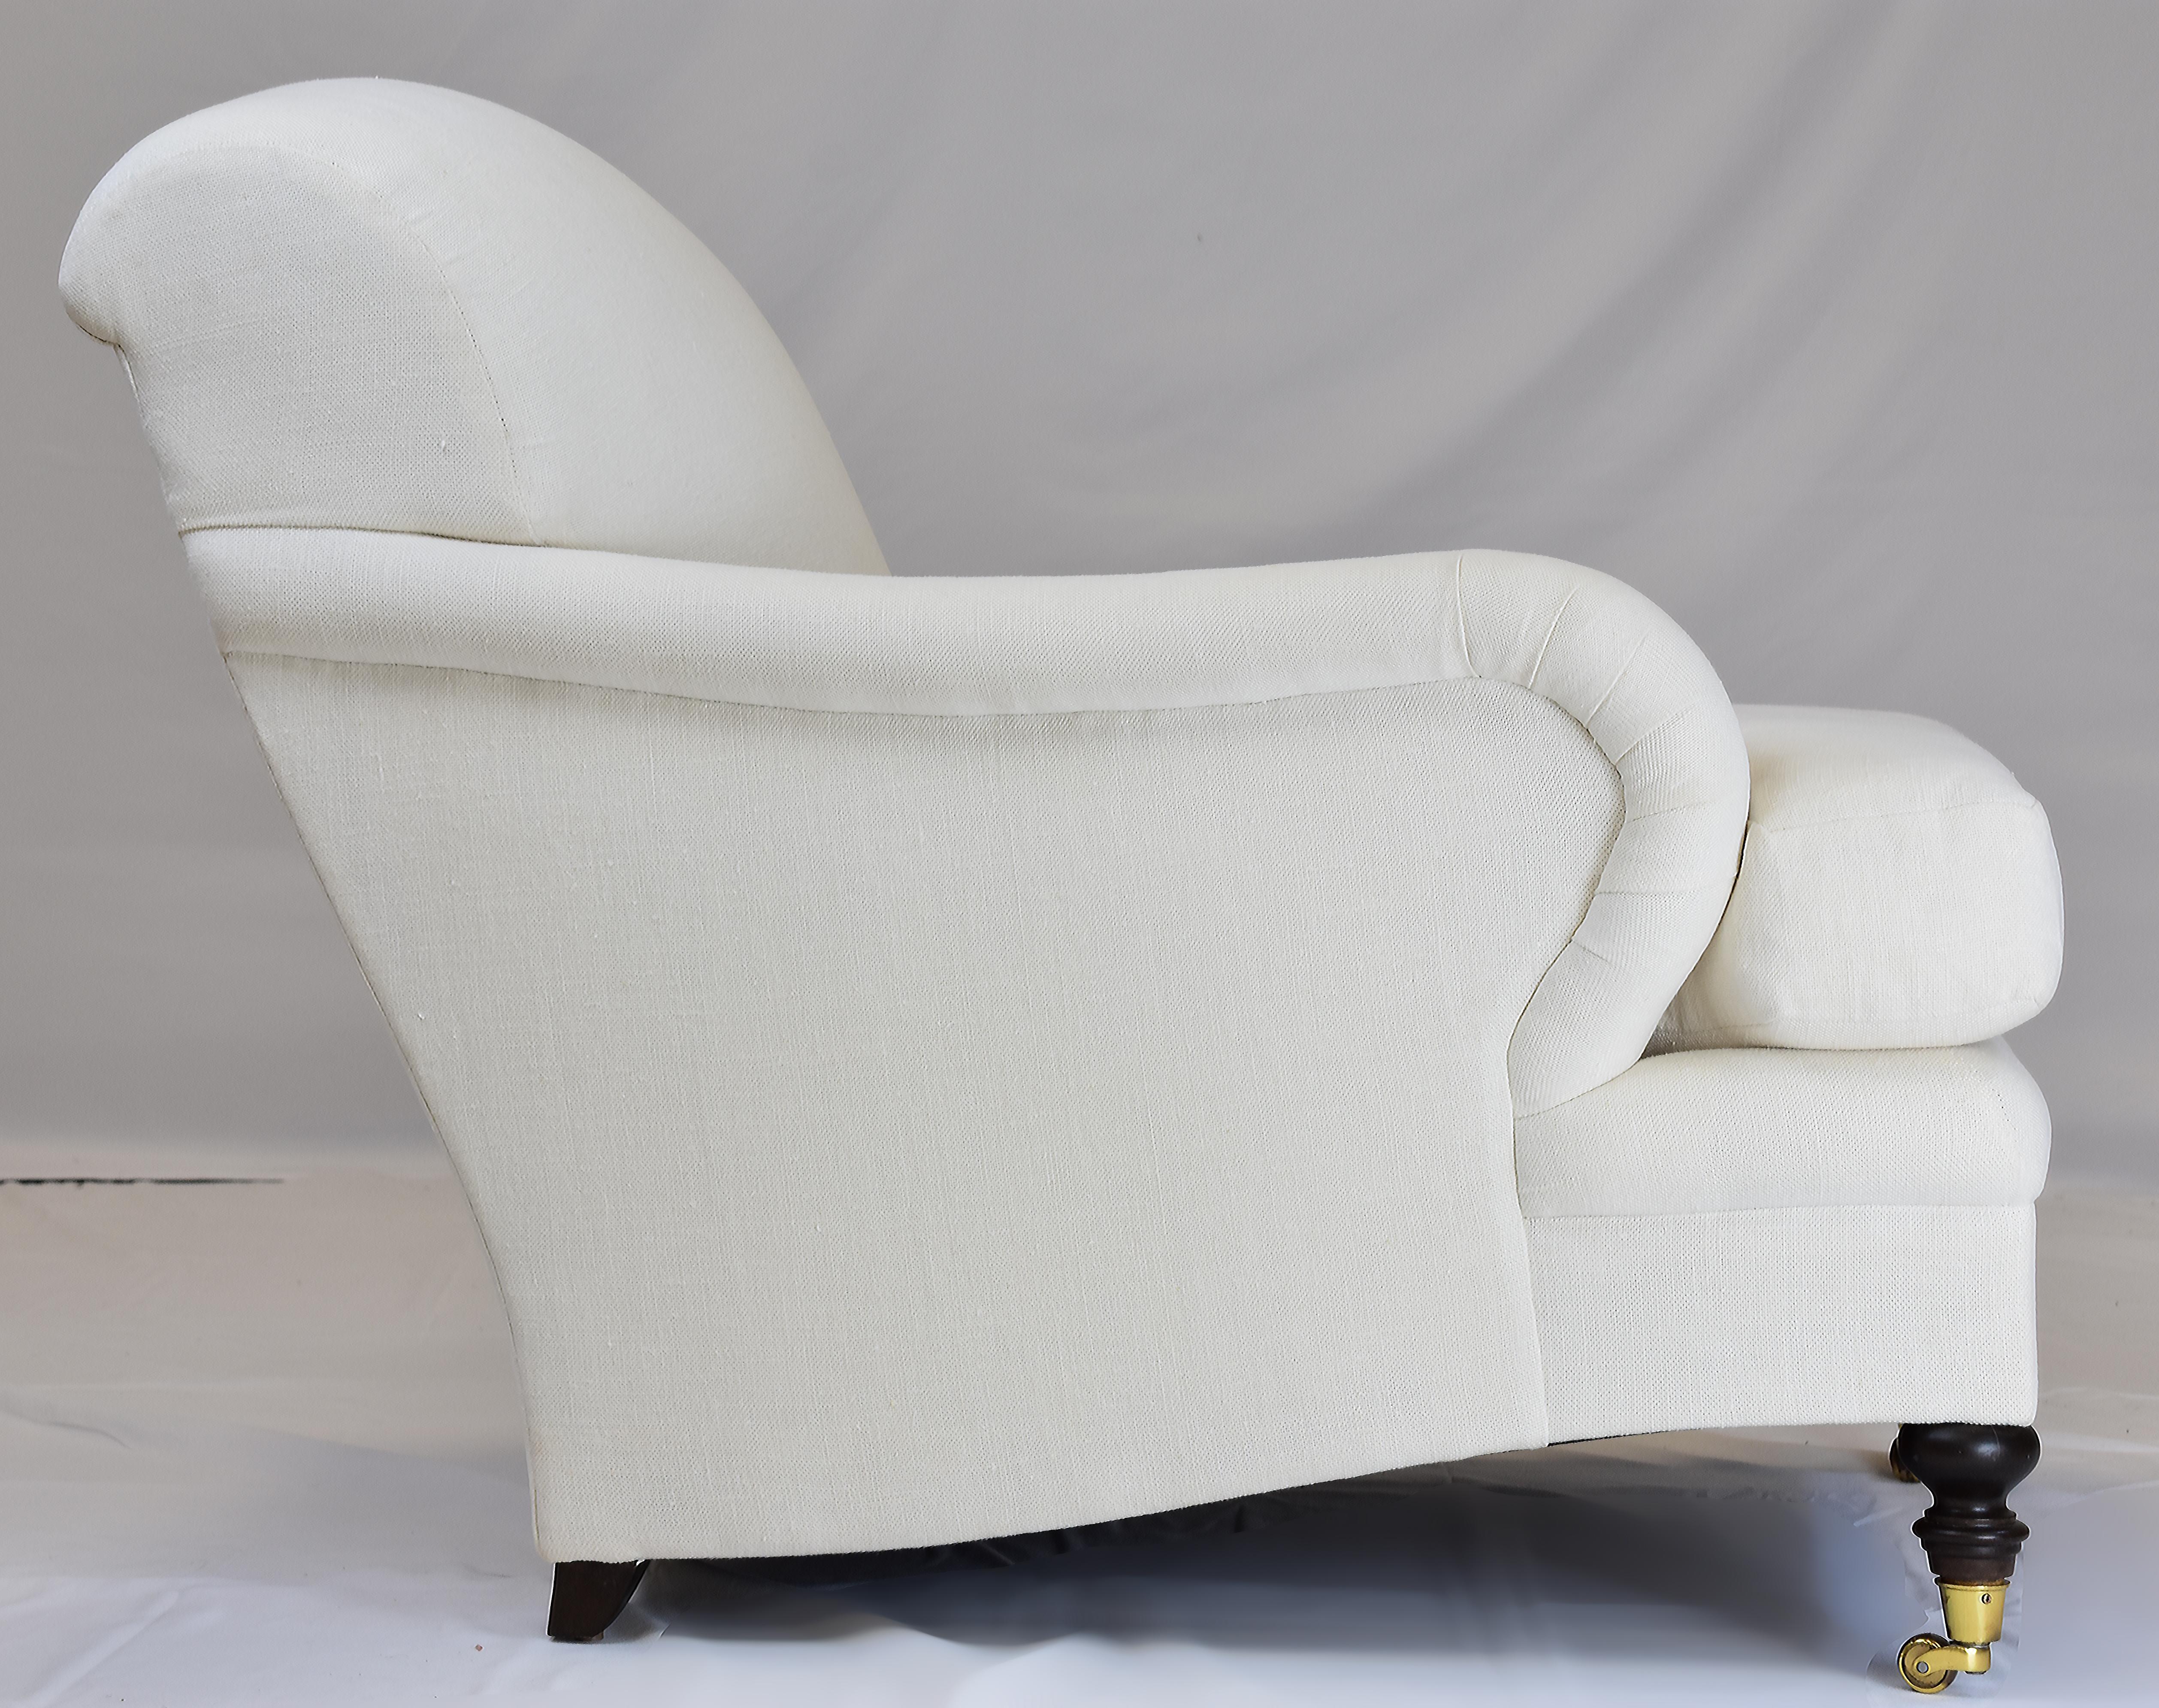 American Le Jeune Upholstery Hampton Lounge Chair On Casters, Showroom Model Off-white